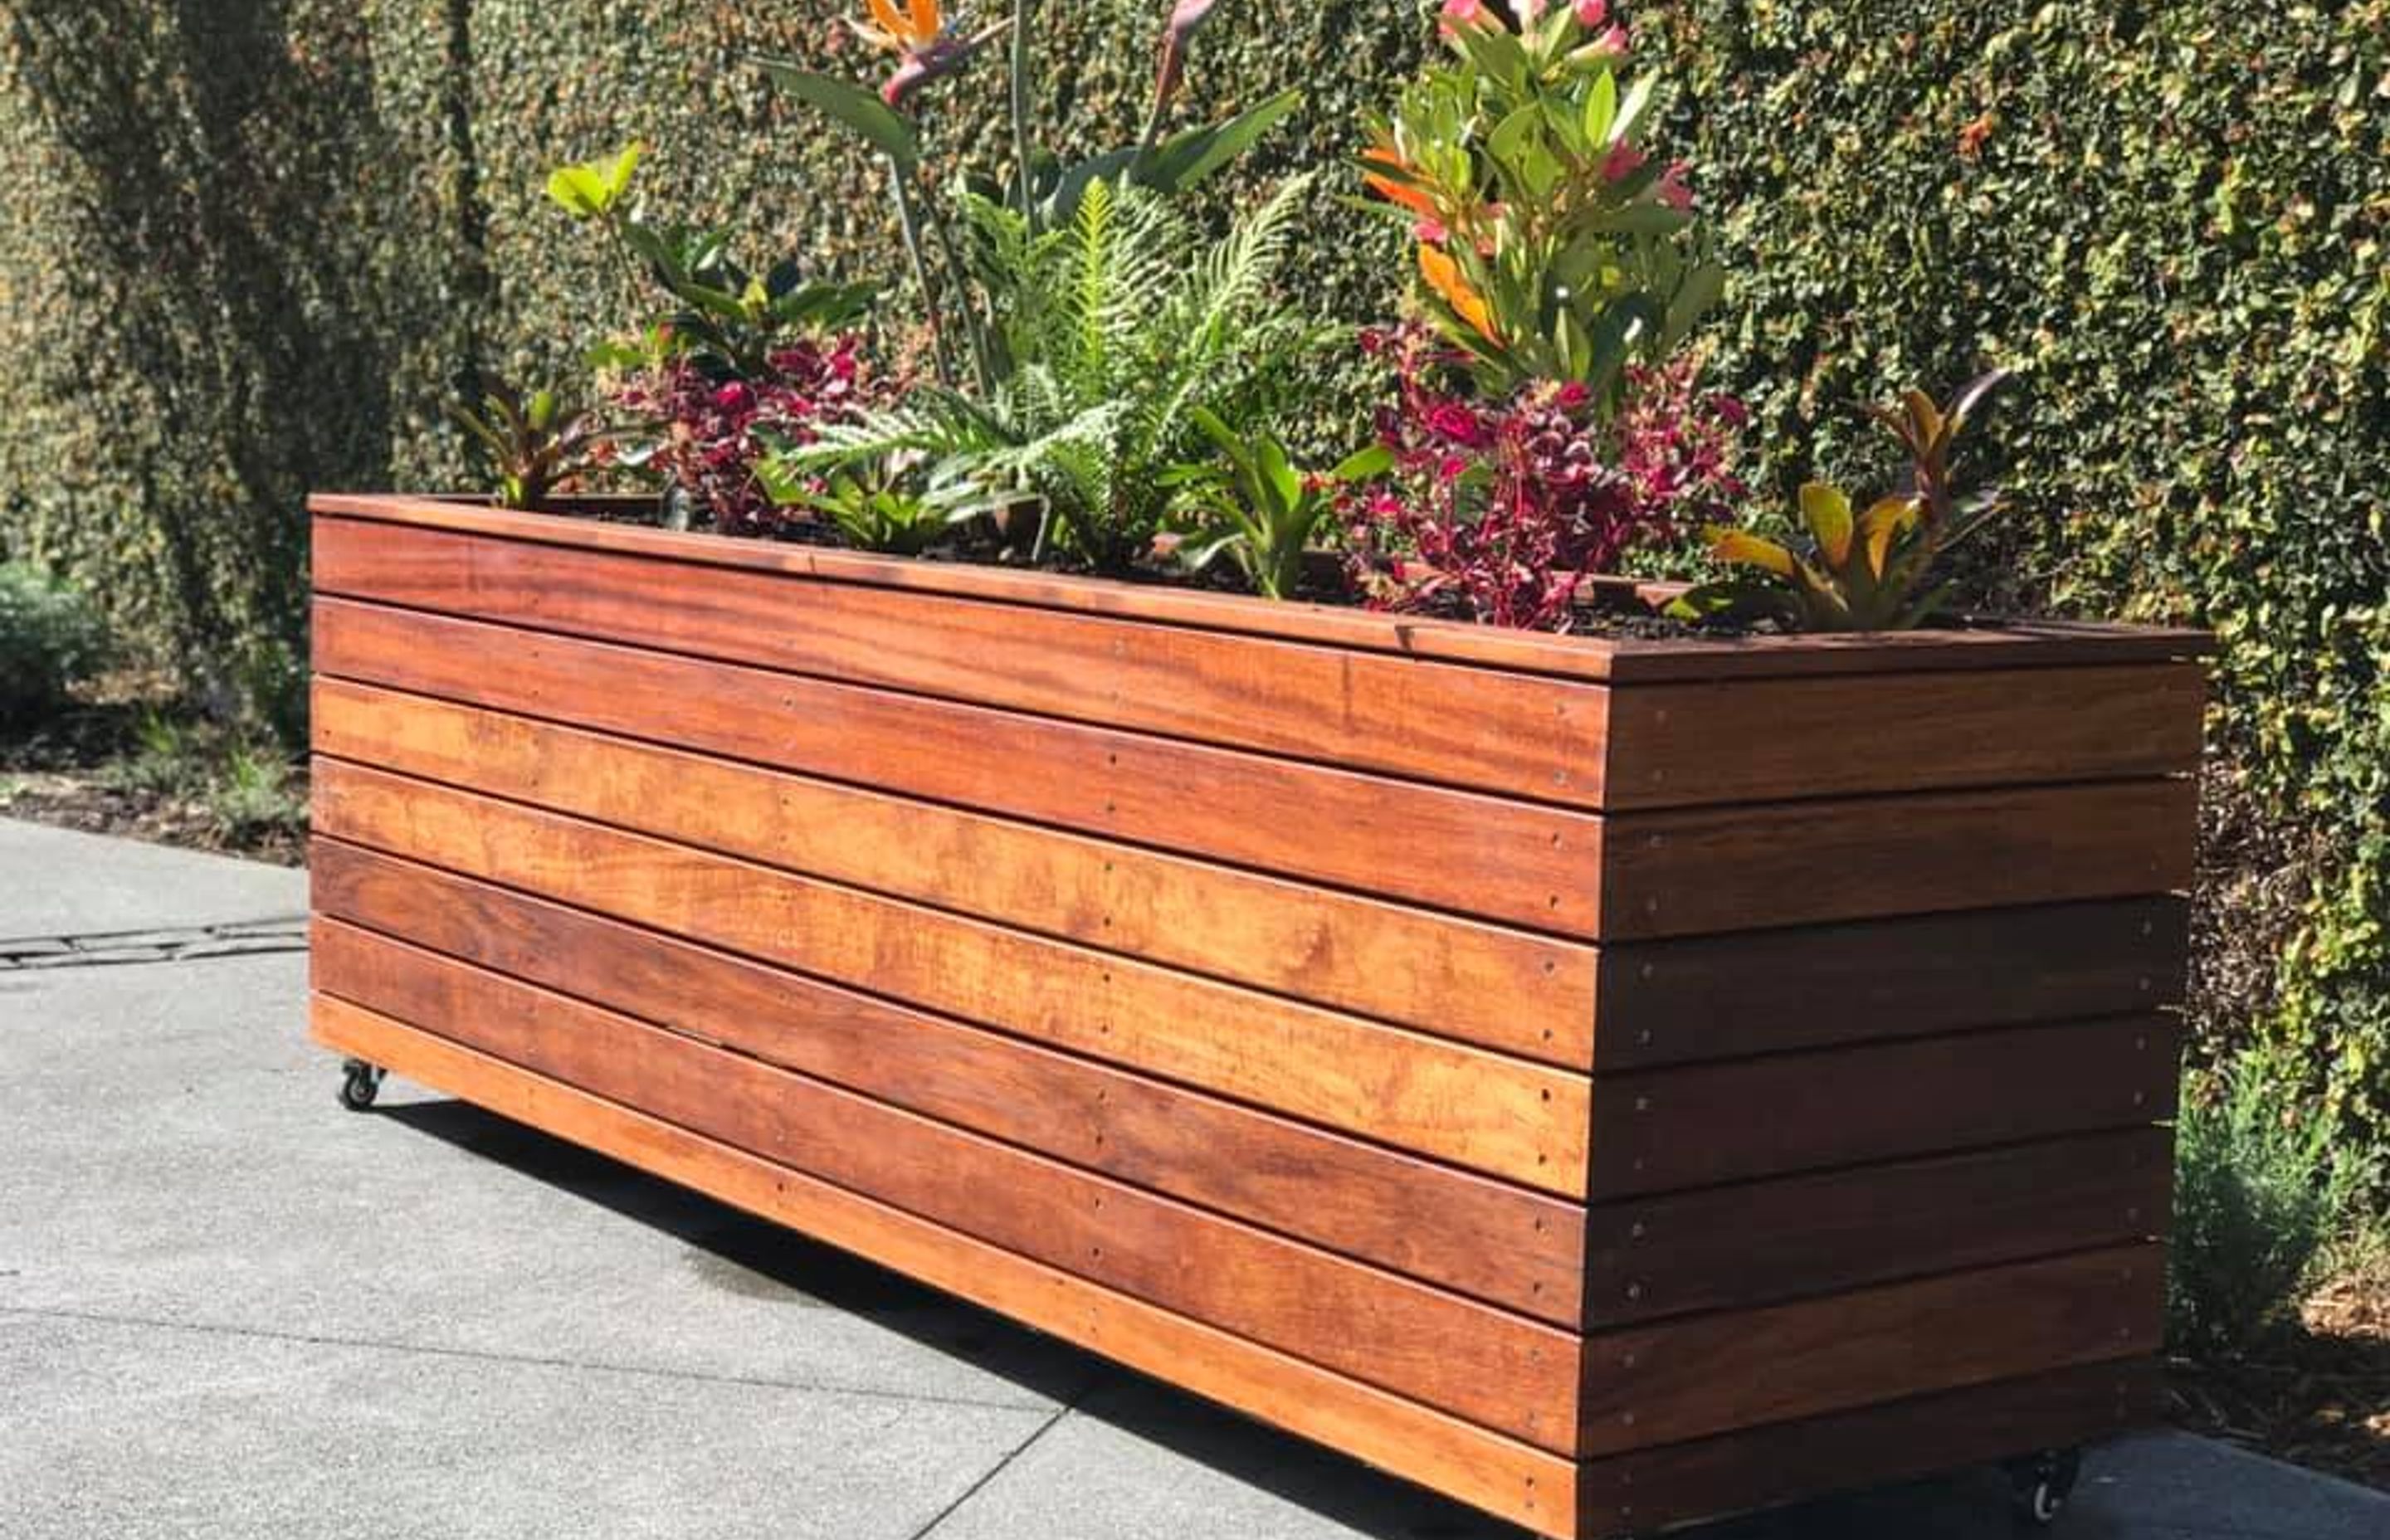 Maui Box - inspired by the Hawaiin tropics. This box is constructed with kwila hardwood and oiled to prevent excessive leaching and to bring out those dark natural colours. Its planted with tropical plants, bringing a relaxed summer vibe to your space.